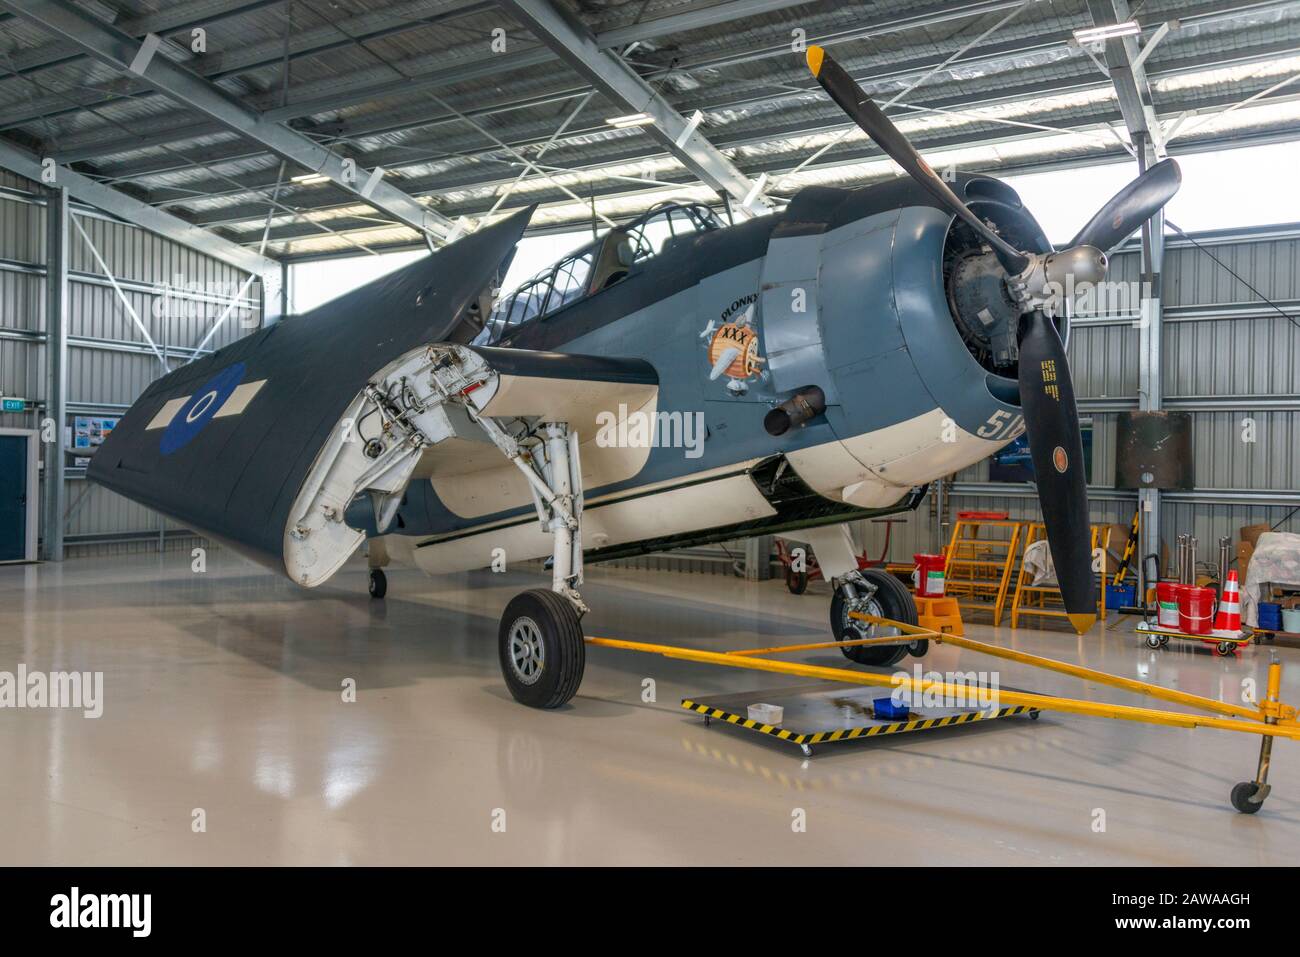 A Grumman TBM Avenger, WWII torpedo bomber in hangar with folded wings, Ohakea, New Zealand. Owned and flown by Brendon Deere. Stock Photo